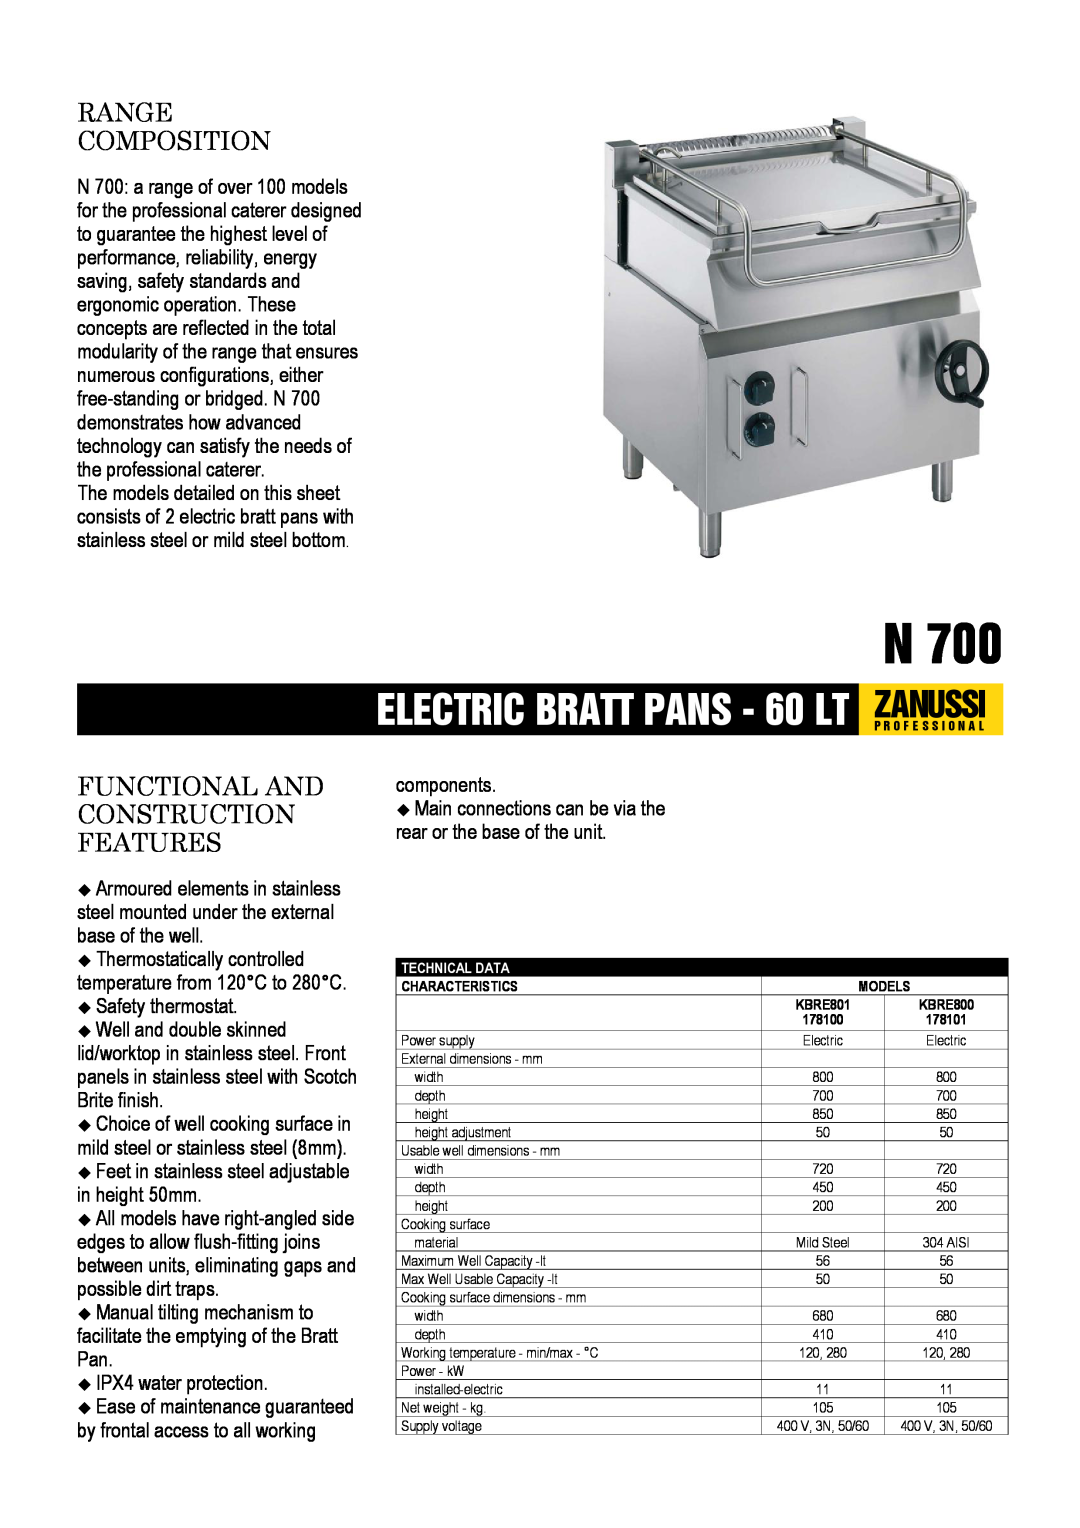 Zanussi N 700 dimensions Zanussi, ELECTRIC BRATT PANS - 60 LT, Range Composition, Functional And Construction Features 